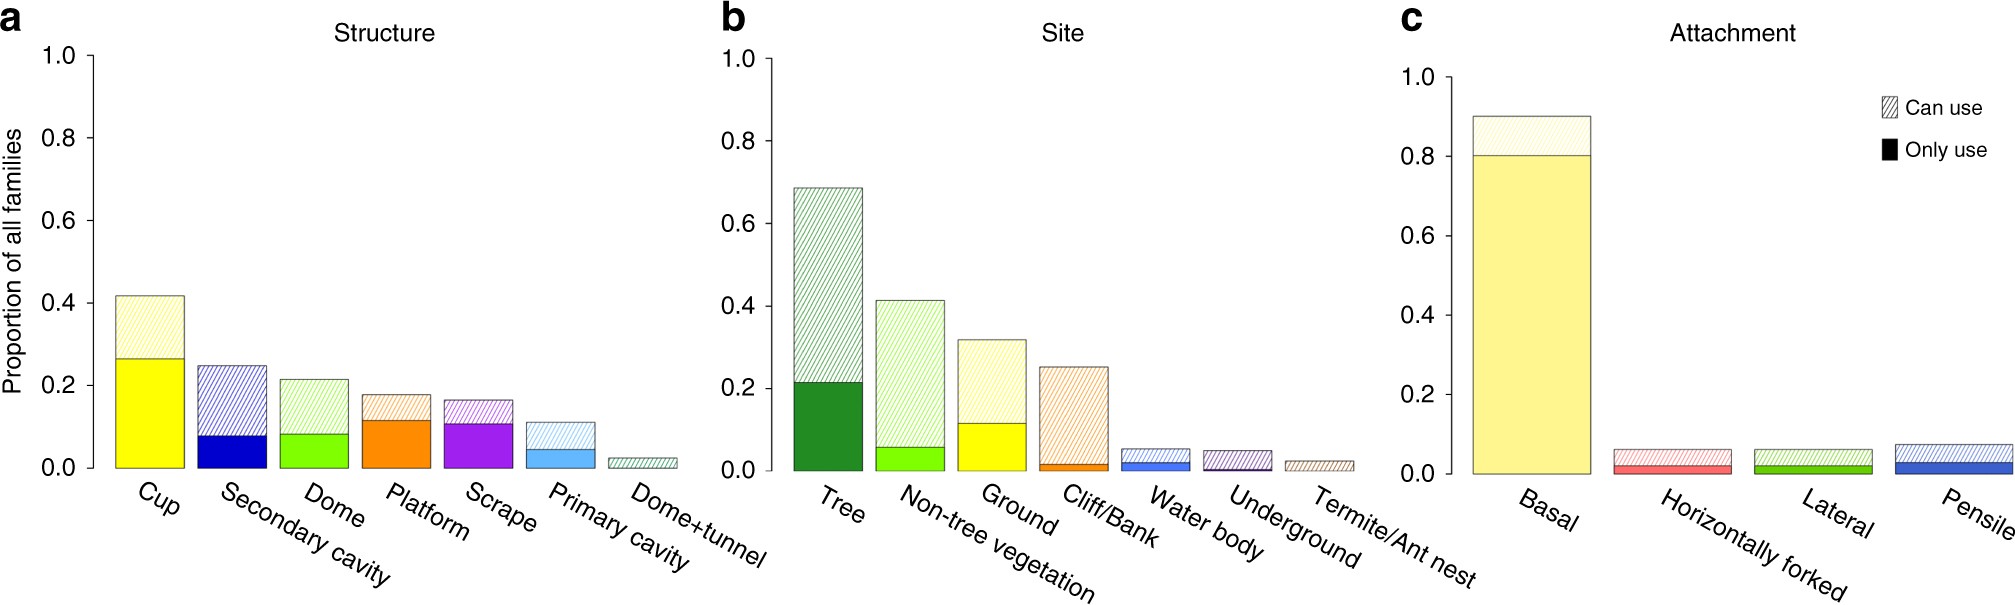 Asynchronous evolution of interdependent nest characters across